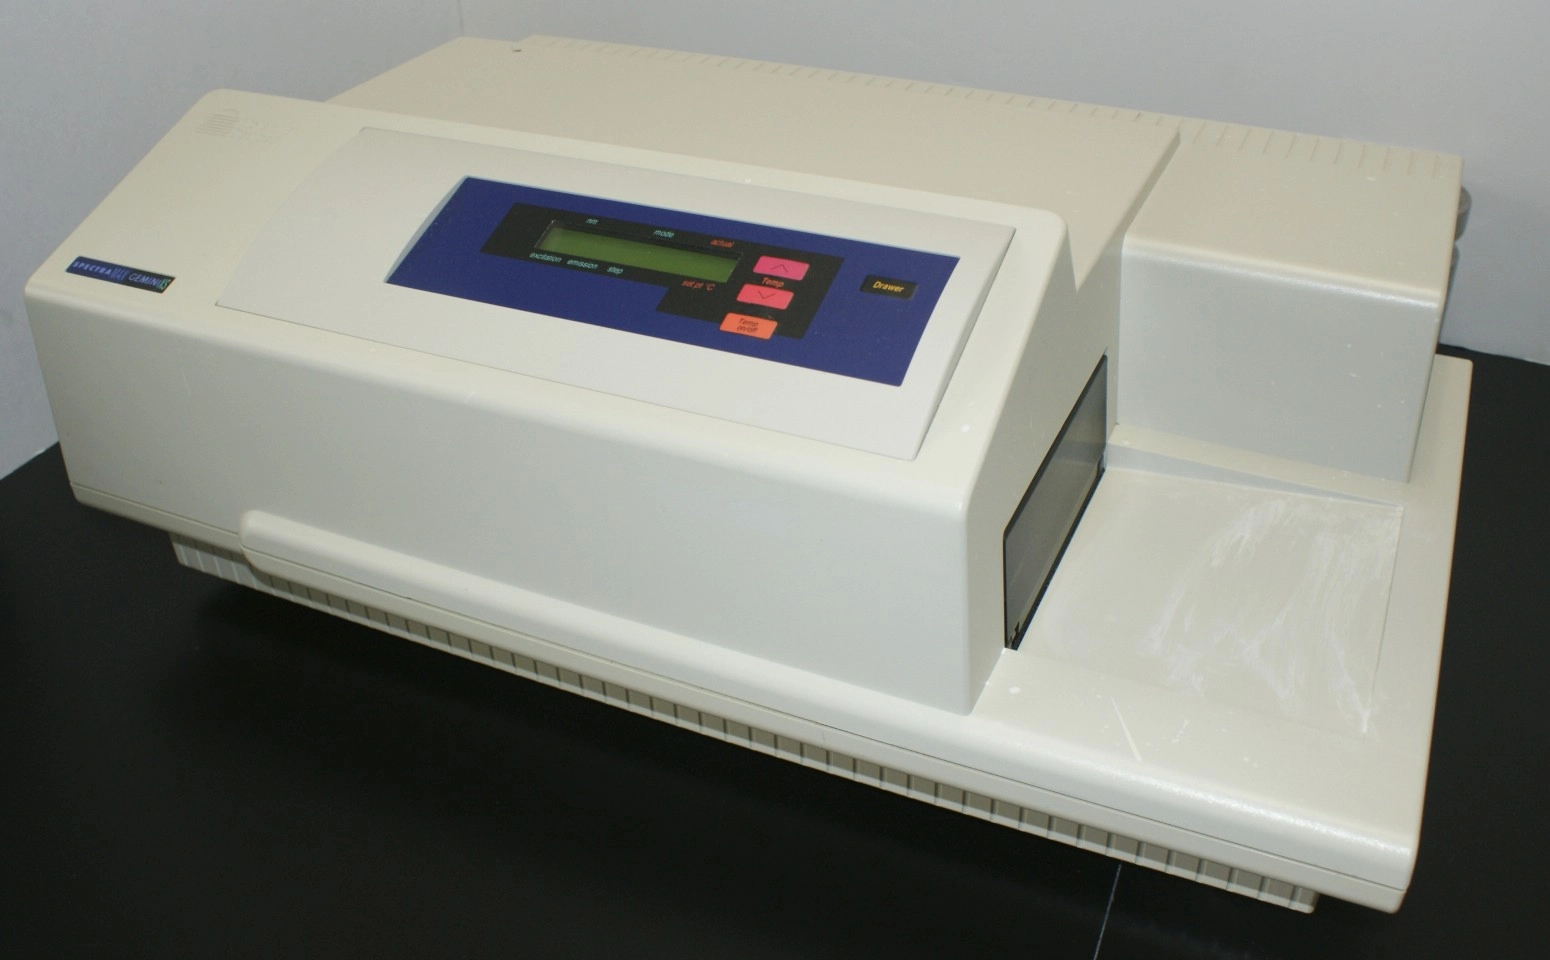 Molecular Devices Spectramax GeminiXS Plate Reader GeminiXS SpectrMAX , used, nice,  excellent condition- inquire for further